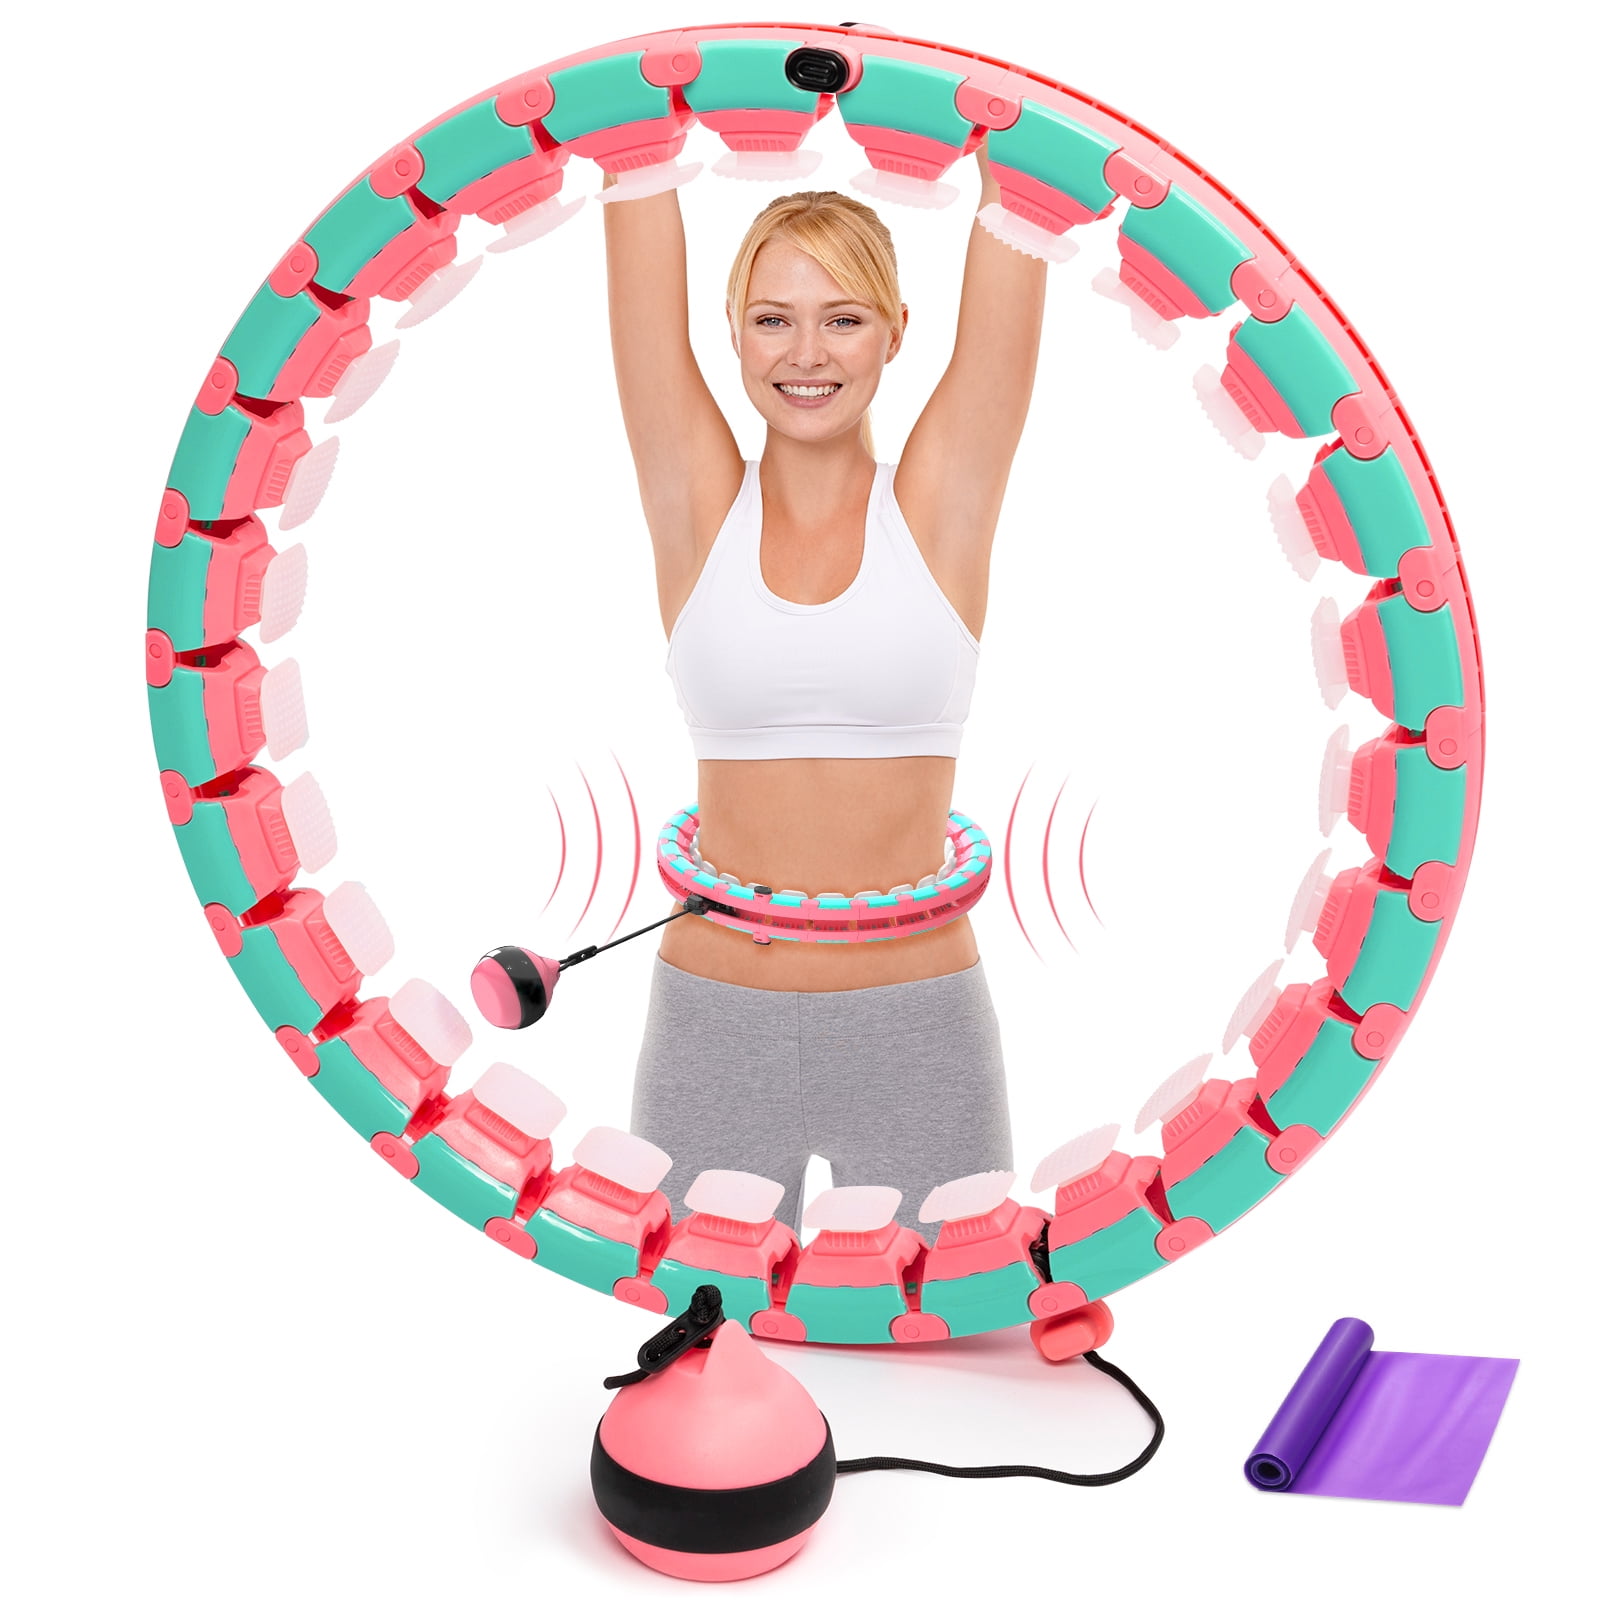 Jabykare 24 Knots Smart Weighted Exercise Hula Hoop Plus Size Infinity Fitness Hoola Hoops with Extra Links Adjustment for Adults Weight Loss 